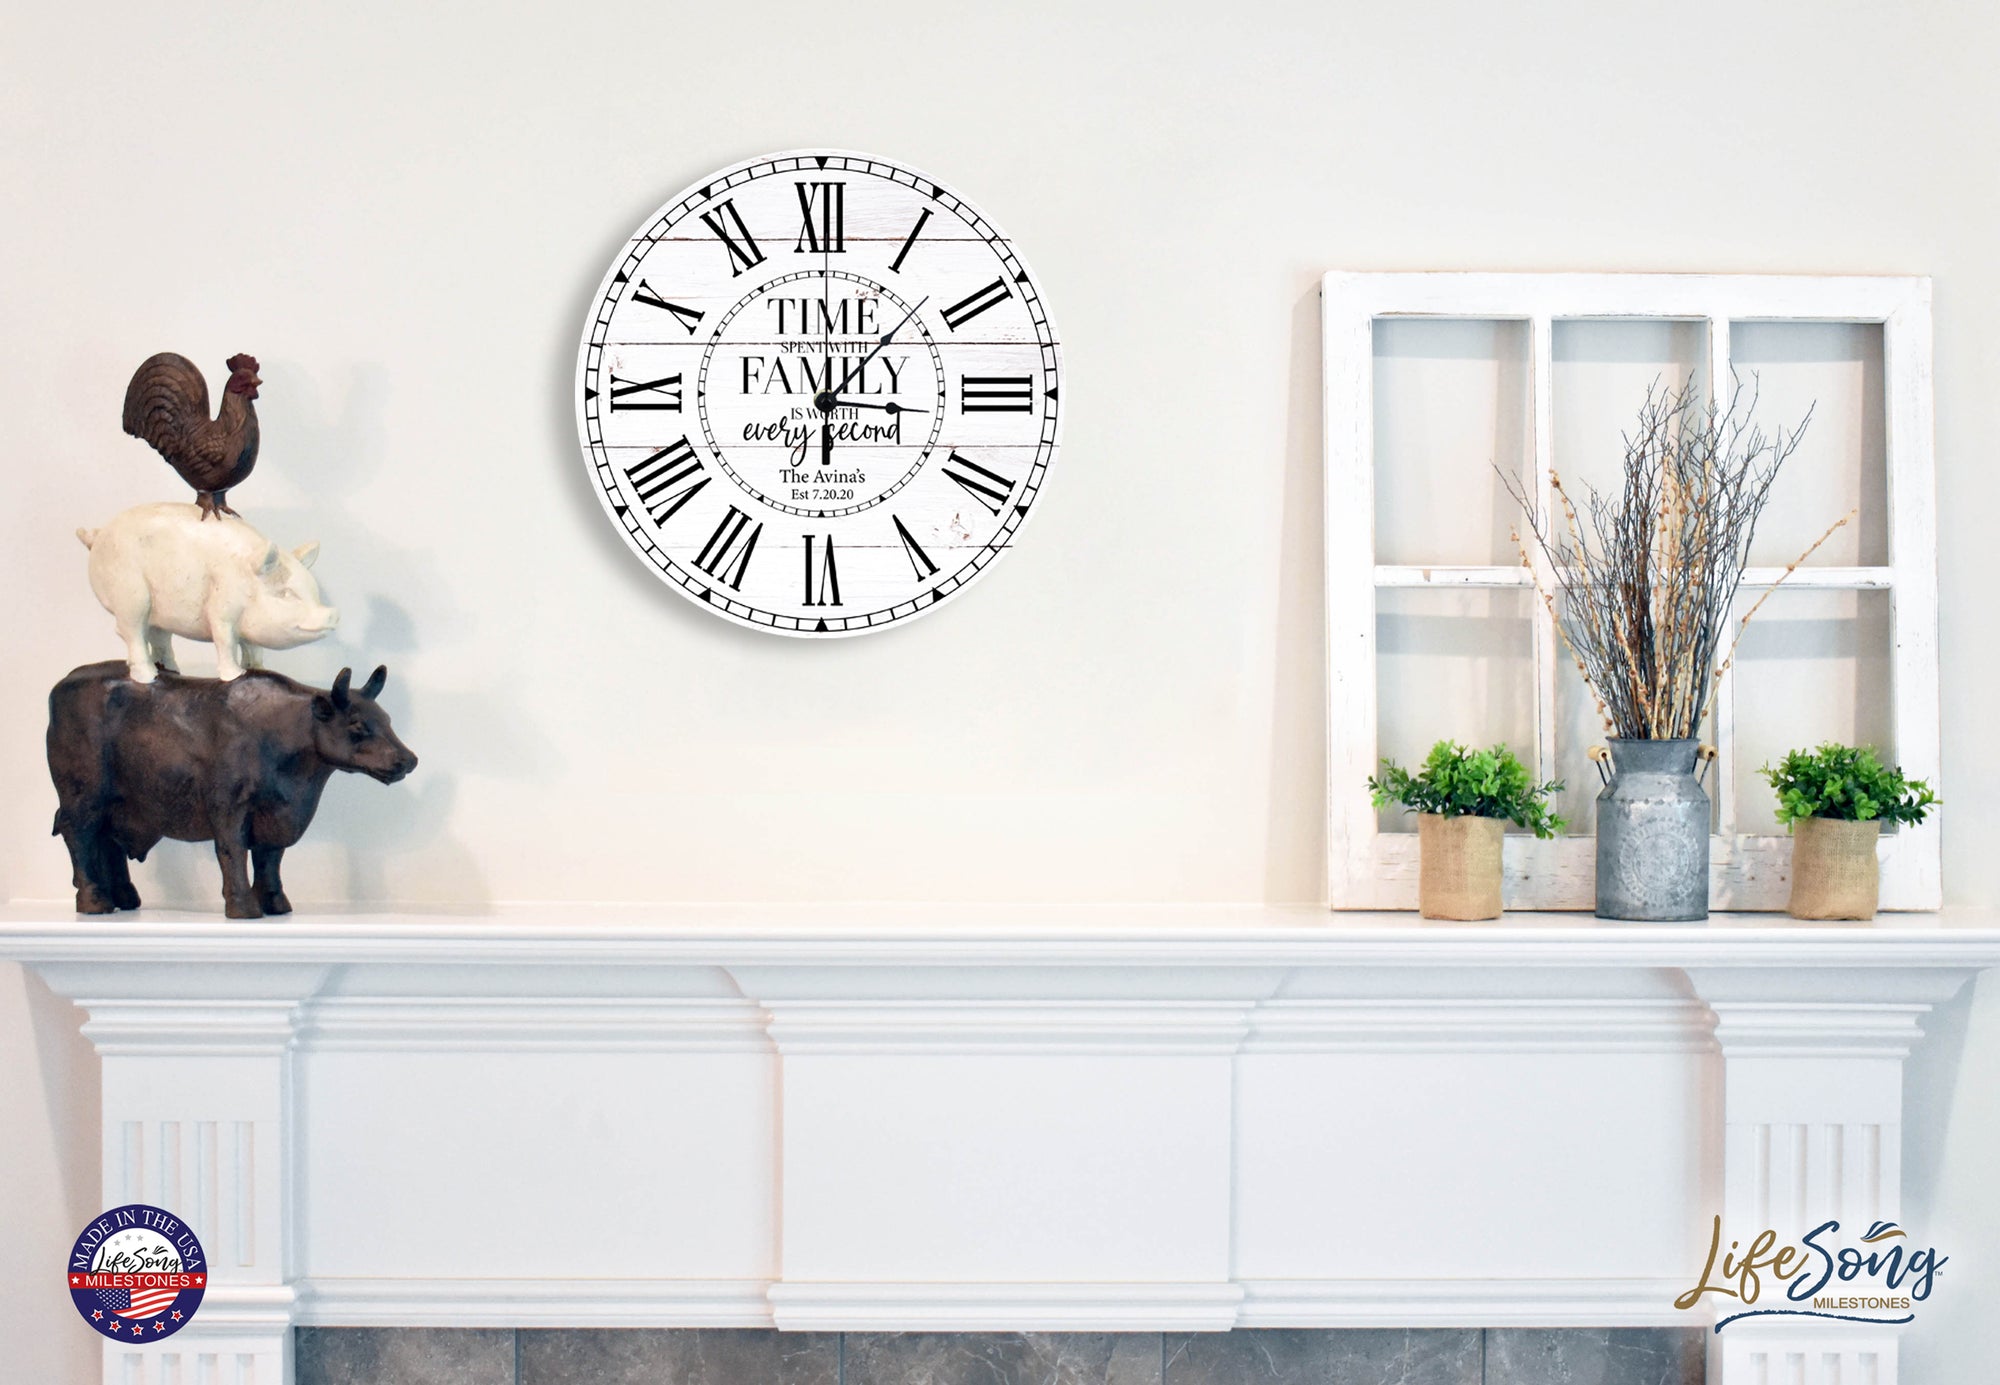 Lifesong Milestones Personalized Inspirational 12” Everyday Home and Family Wall Clock - (The Family). Wooden Decoration for Wedding, Anniversary Gift for Couples, Parents, Him, Her, Husband, Wife